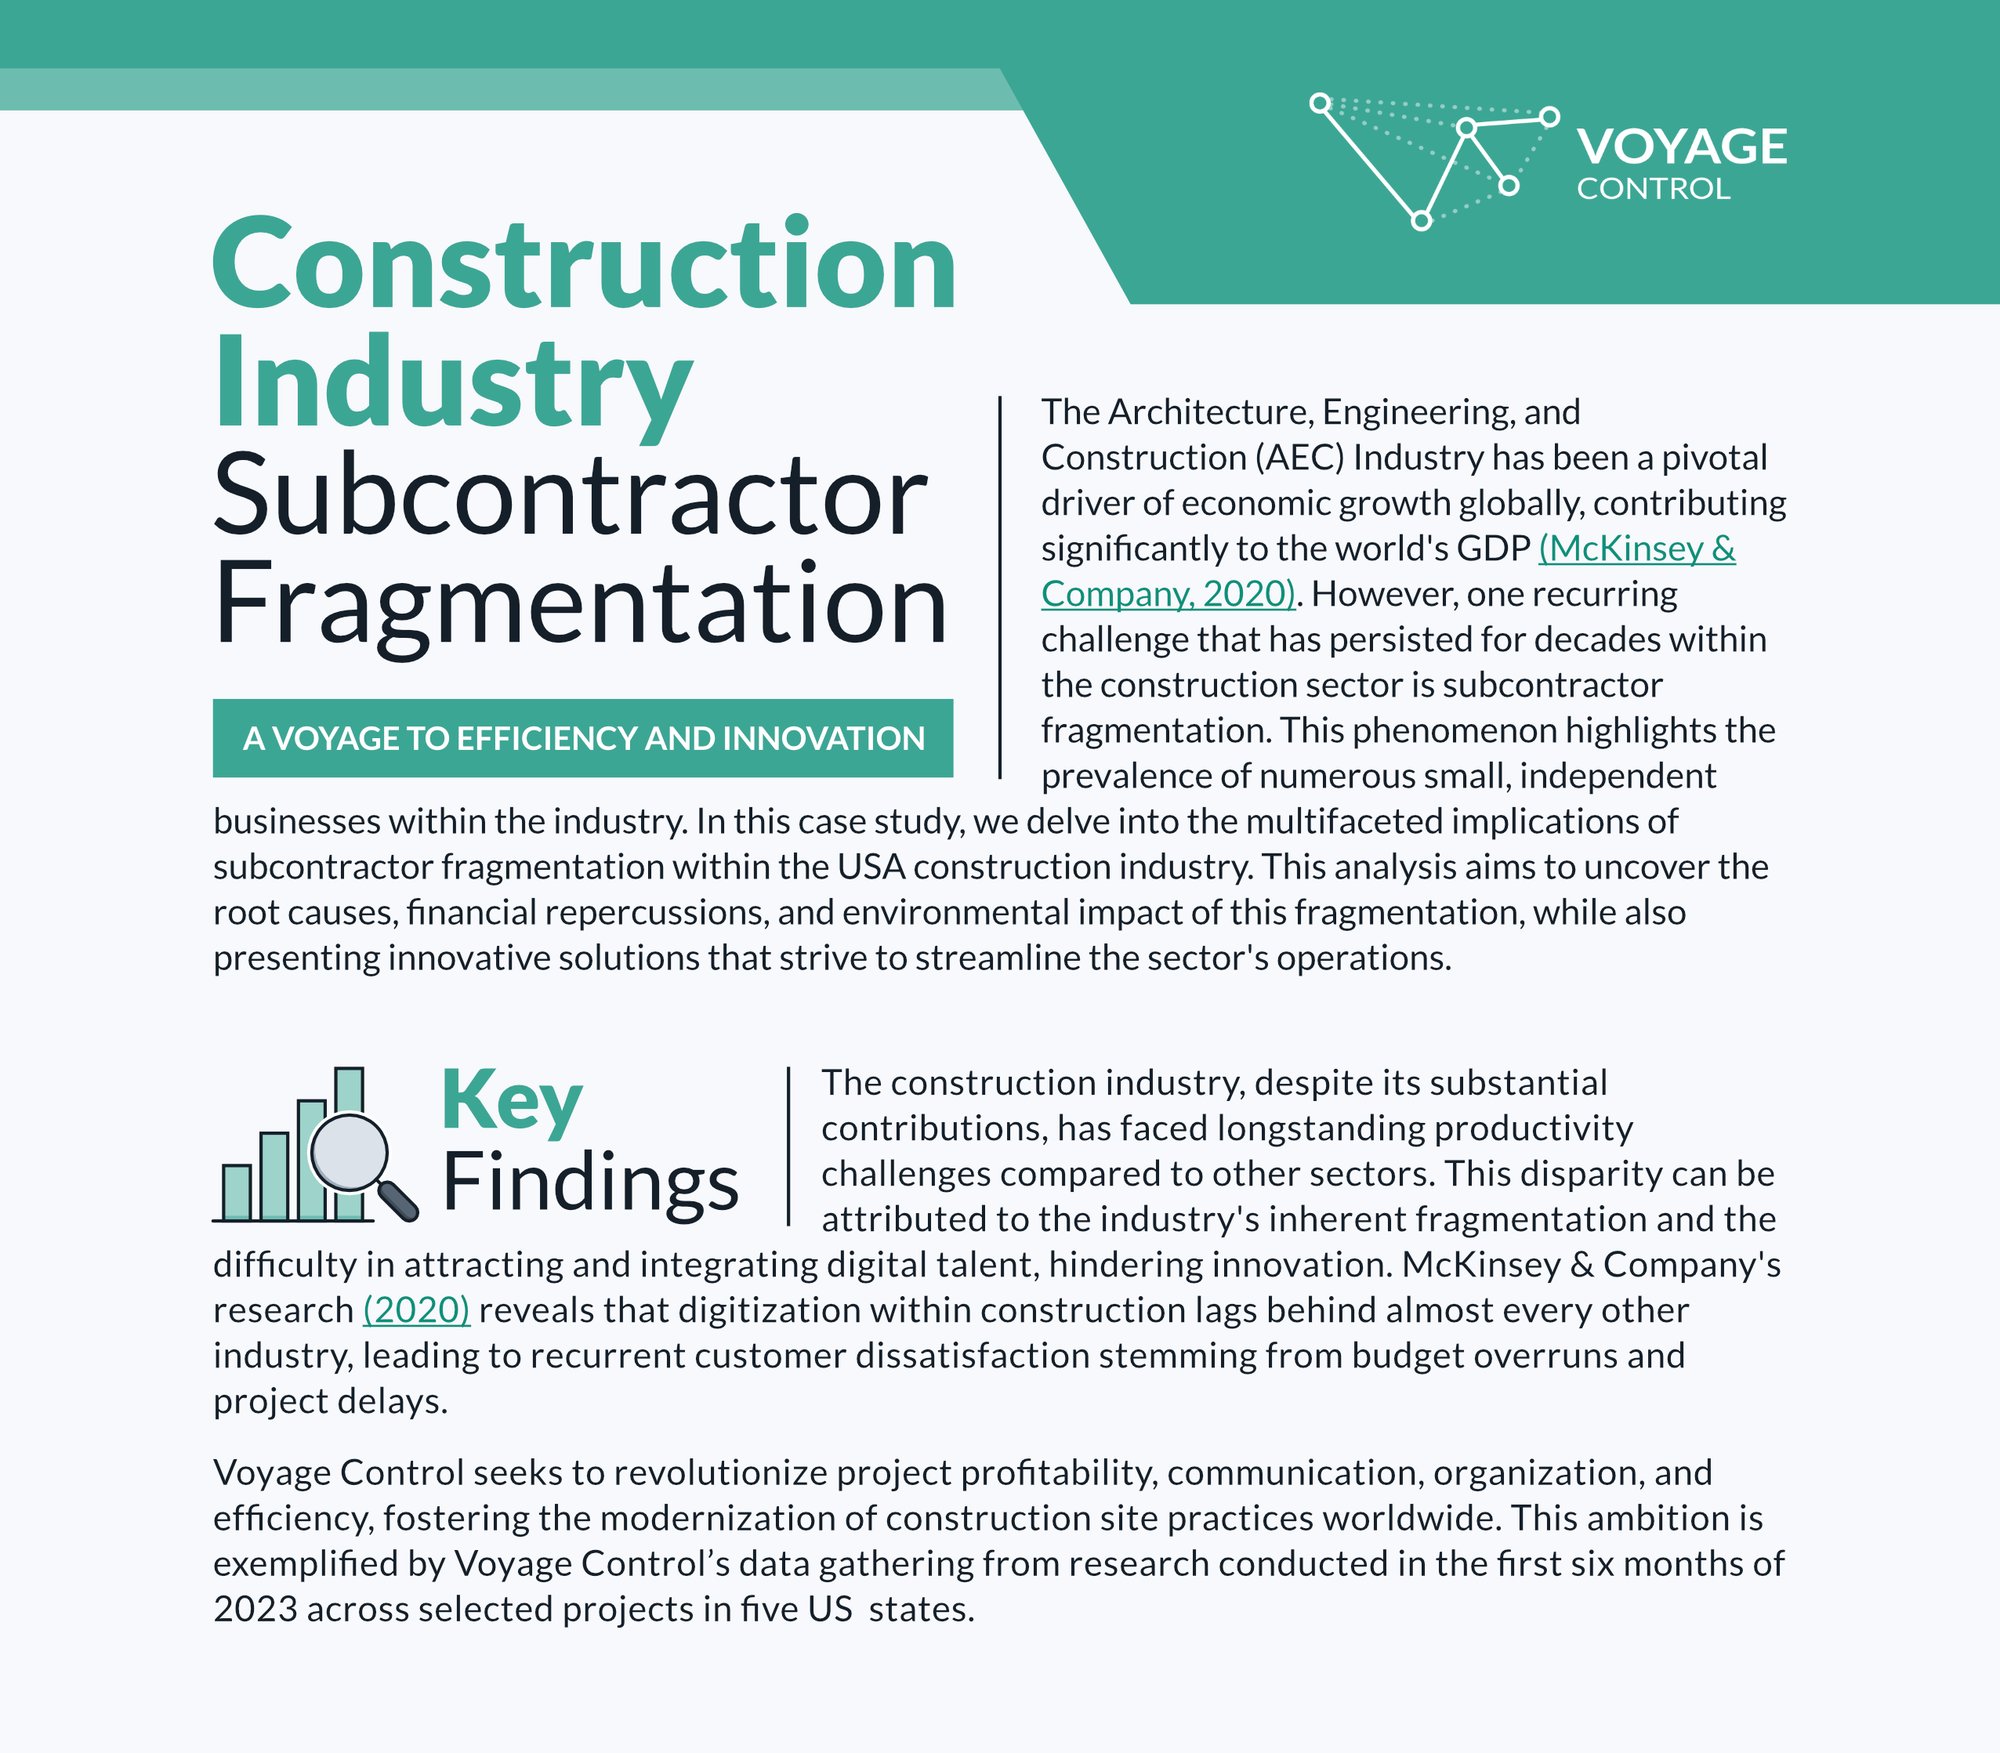 Construction industry subcontractor fragmentation case study. A voyage to efficiency and innovation